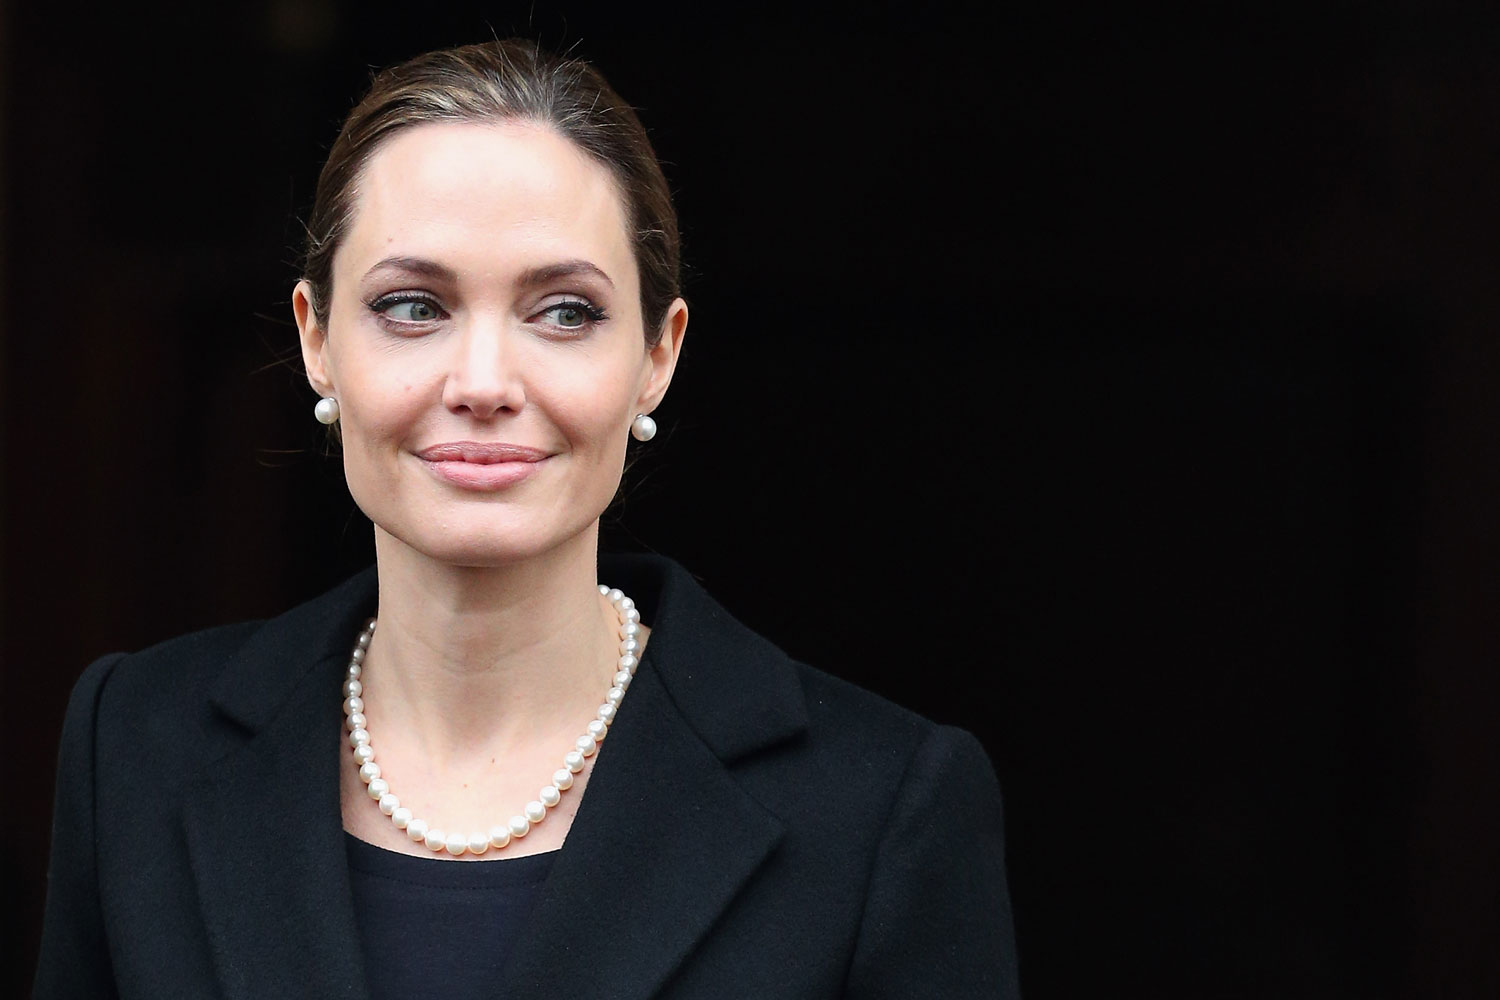 FILE: Actress Angelina Jolie Reveals She Underwent a Preventative Double Mastectomy